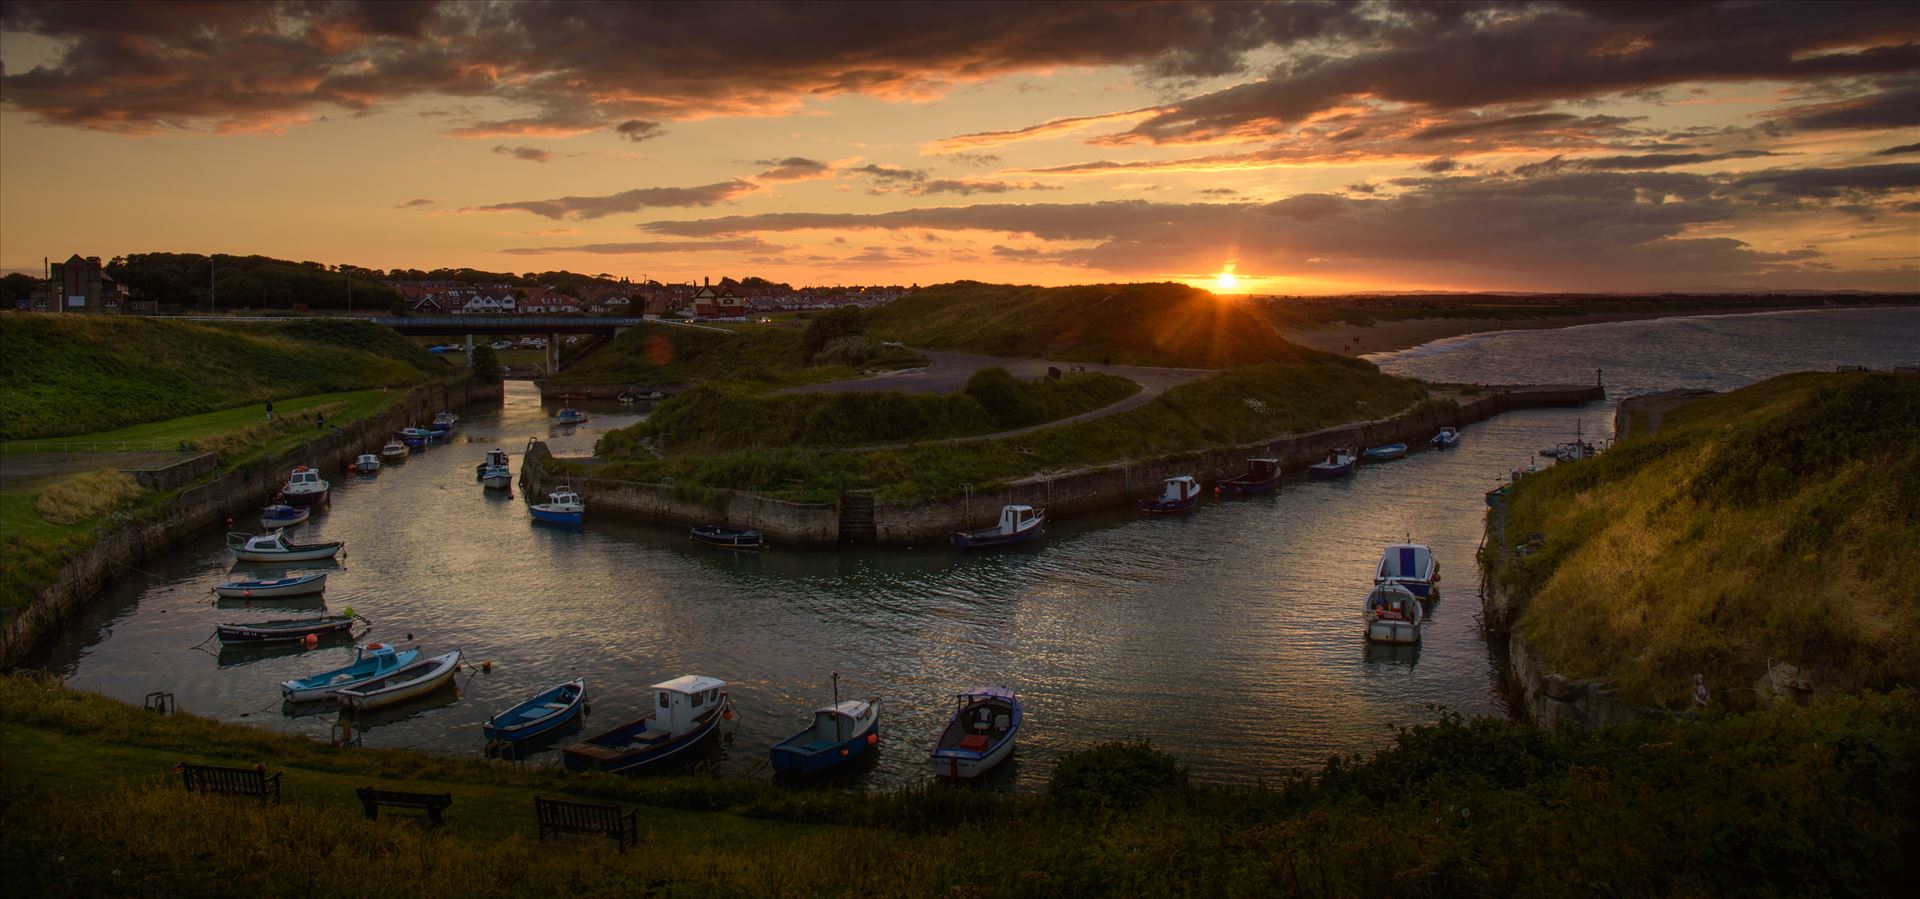 Sunset at the harbour Sunset at Seaton Sluice harbour, Northumberland by philreay